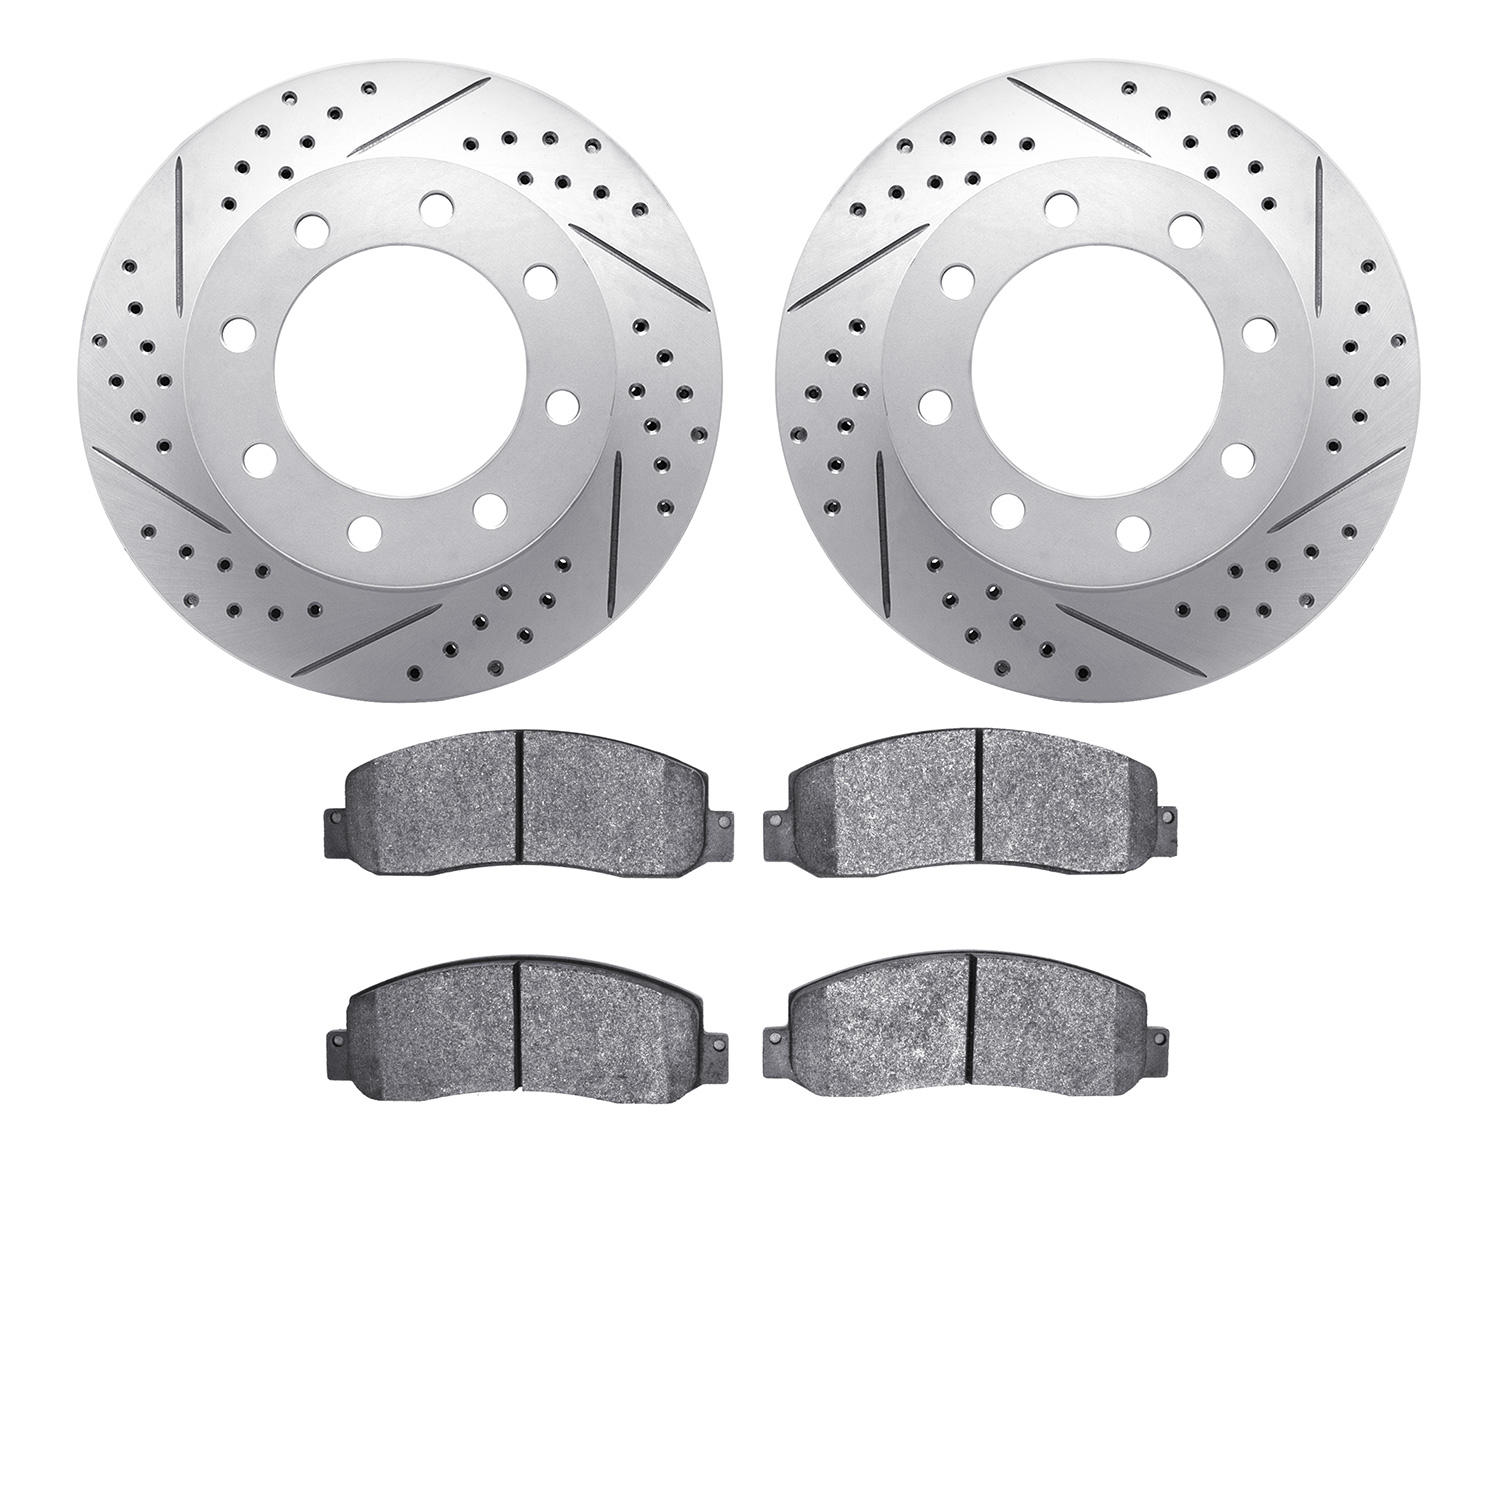 2202-99150 Geoperformance Drilled/Slotted Rotors w/Heavy-Duty Pads Kit, 2005-2011 Ford/Lincoln/Mercury/Mazda, Position: Front